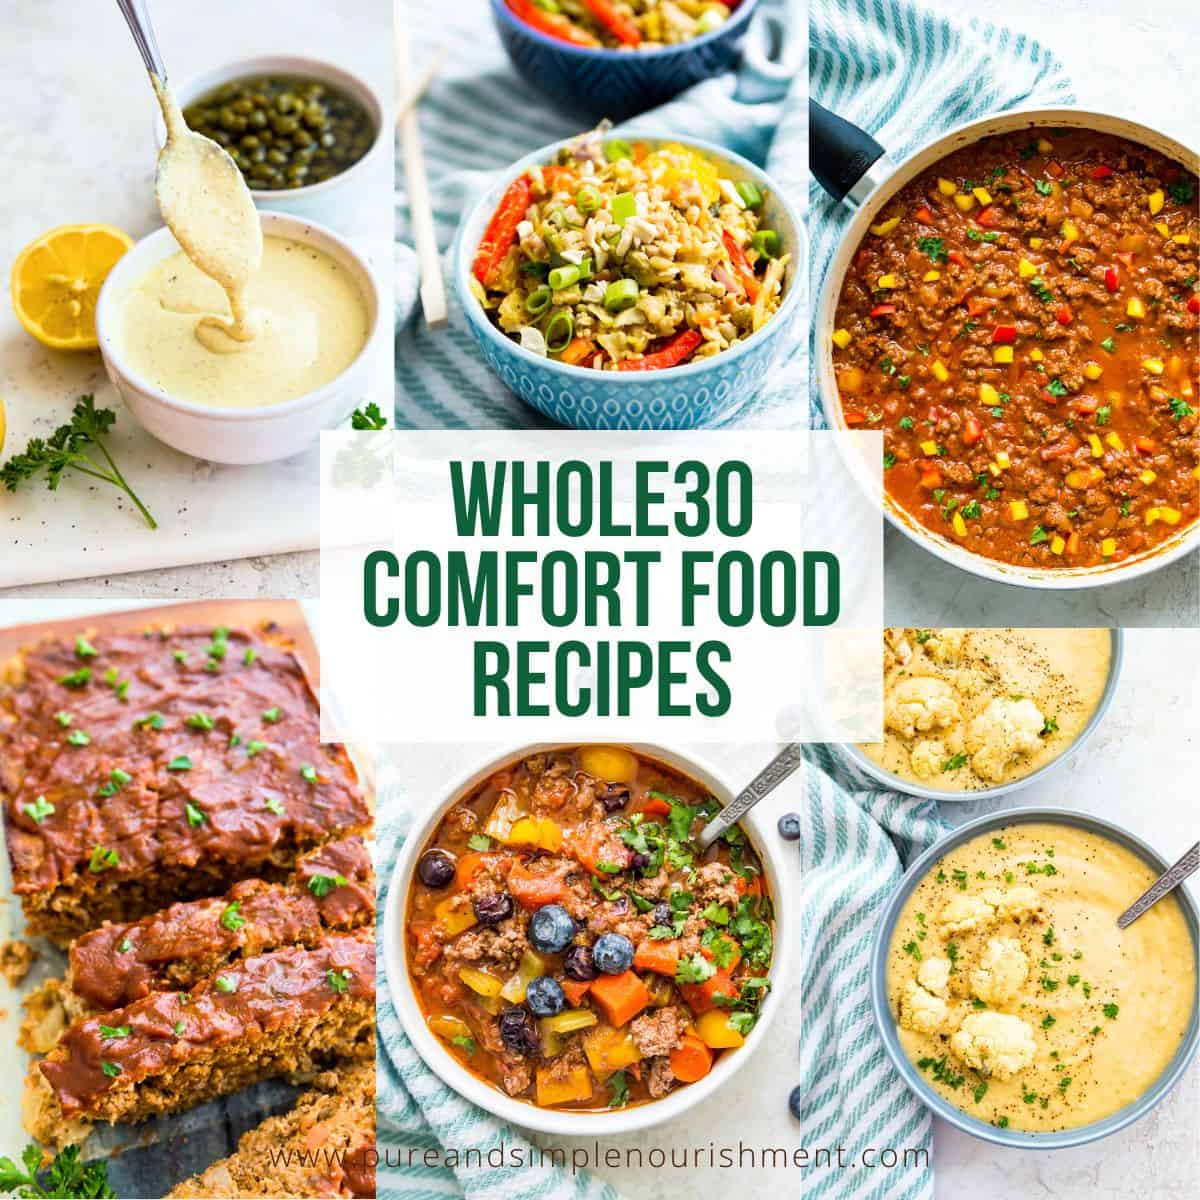 Whole30 Comfort Food - Pure and Simple Nourishment